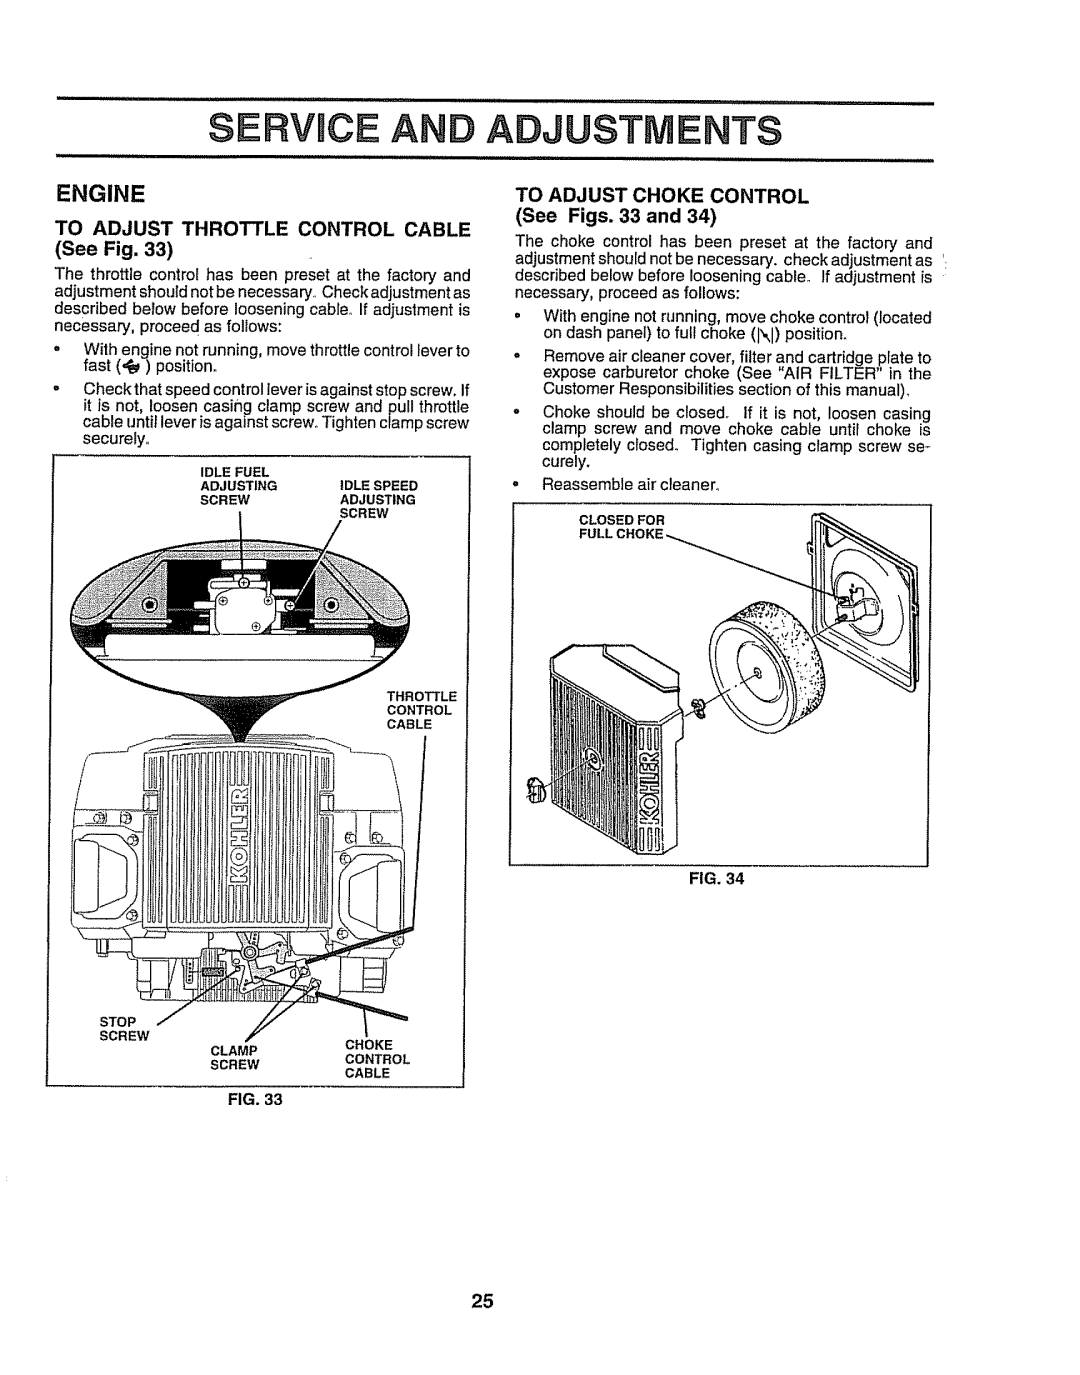 Craftsman 917O251550 owner manual SERVmCE ADJUSTMENTS, Engine, To Adjust Choke Control, See Figs. 33 and 